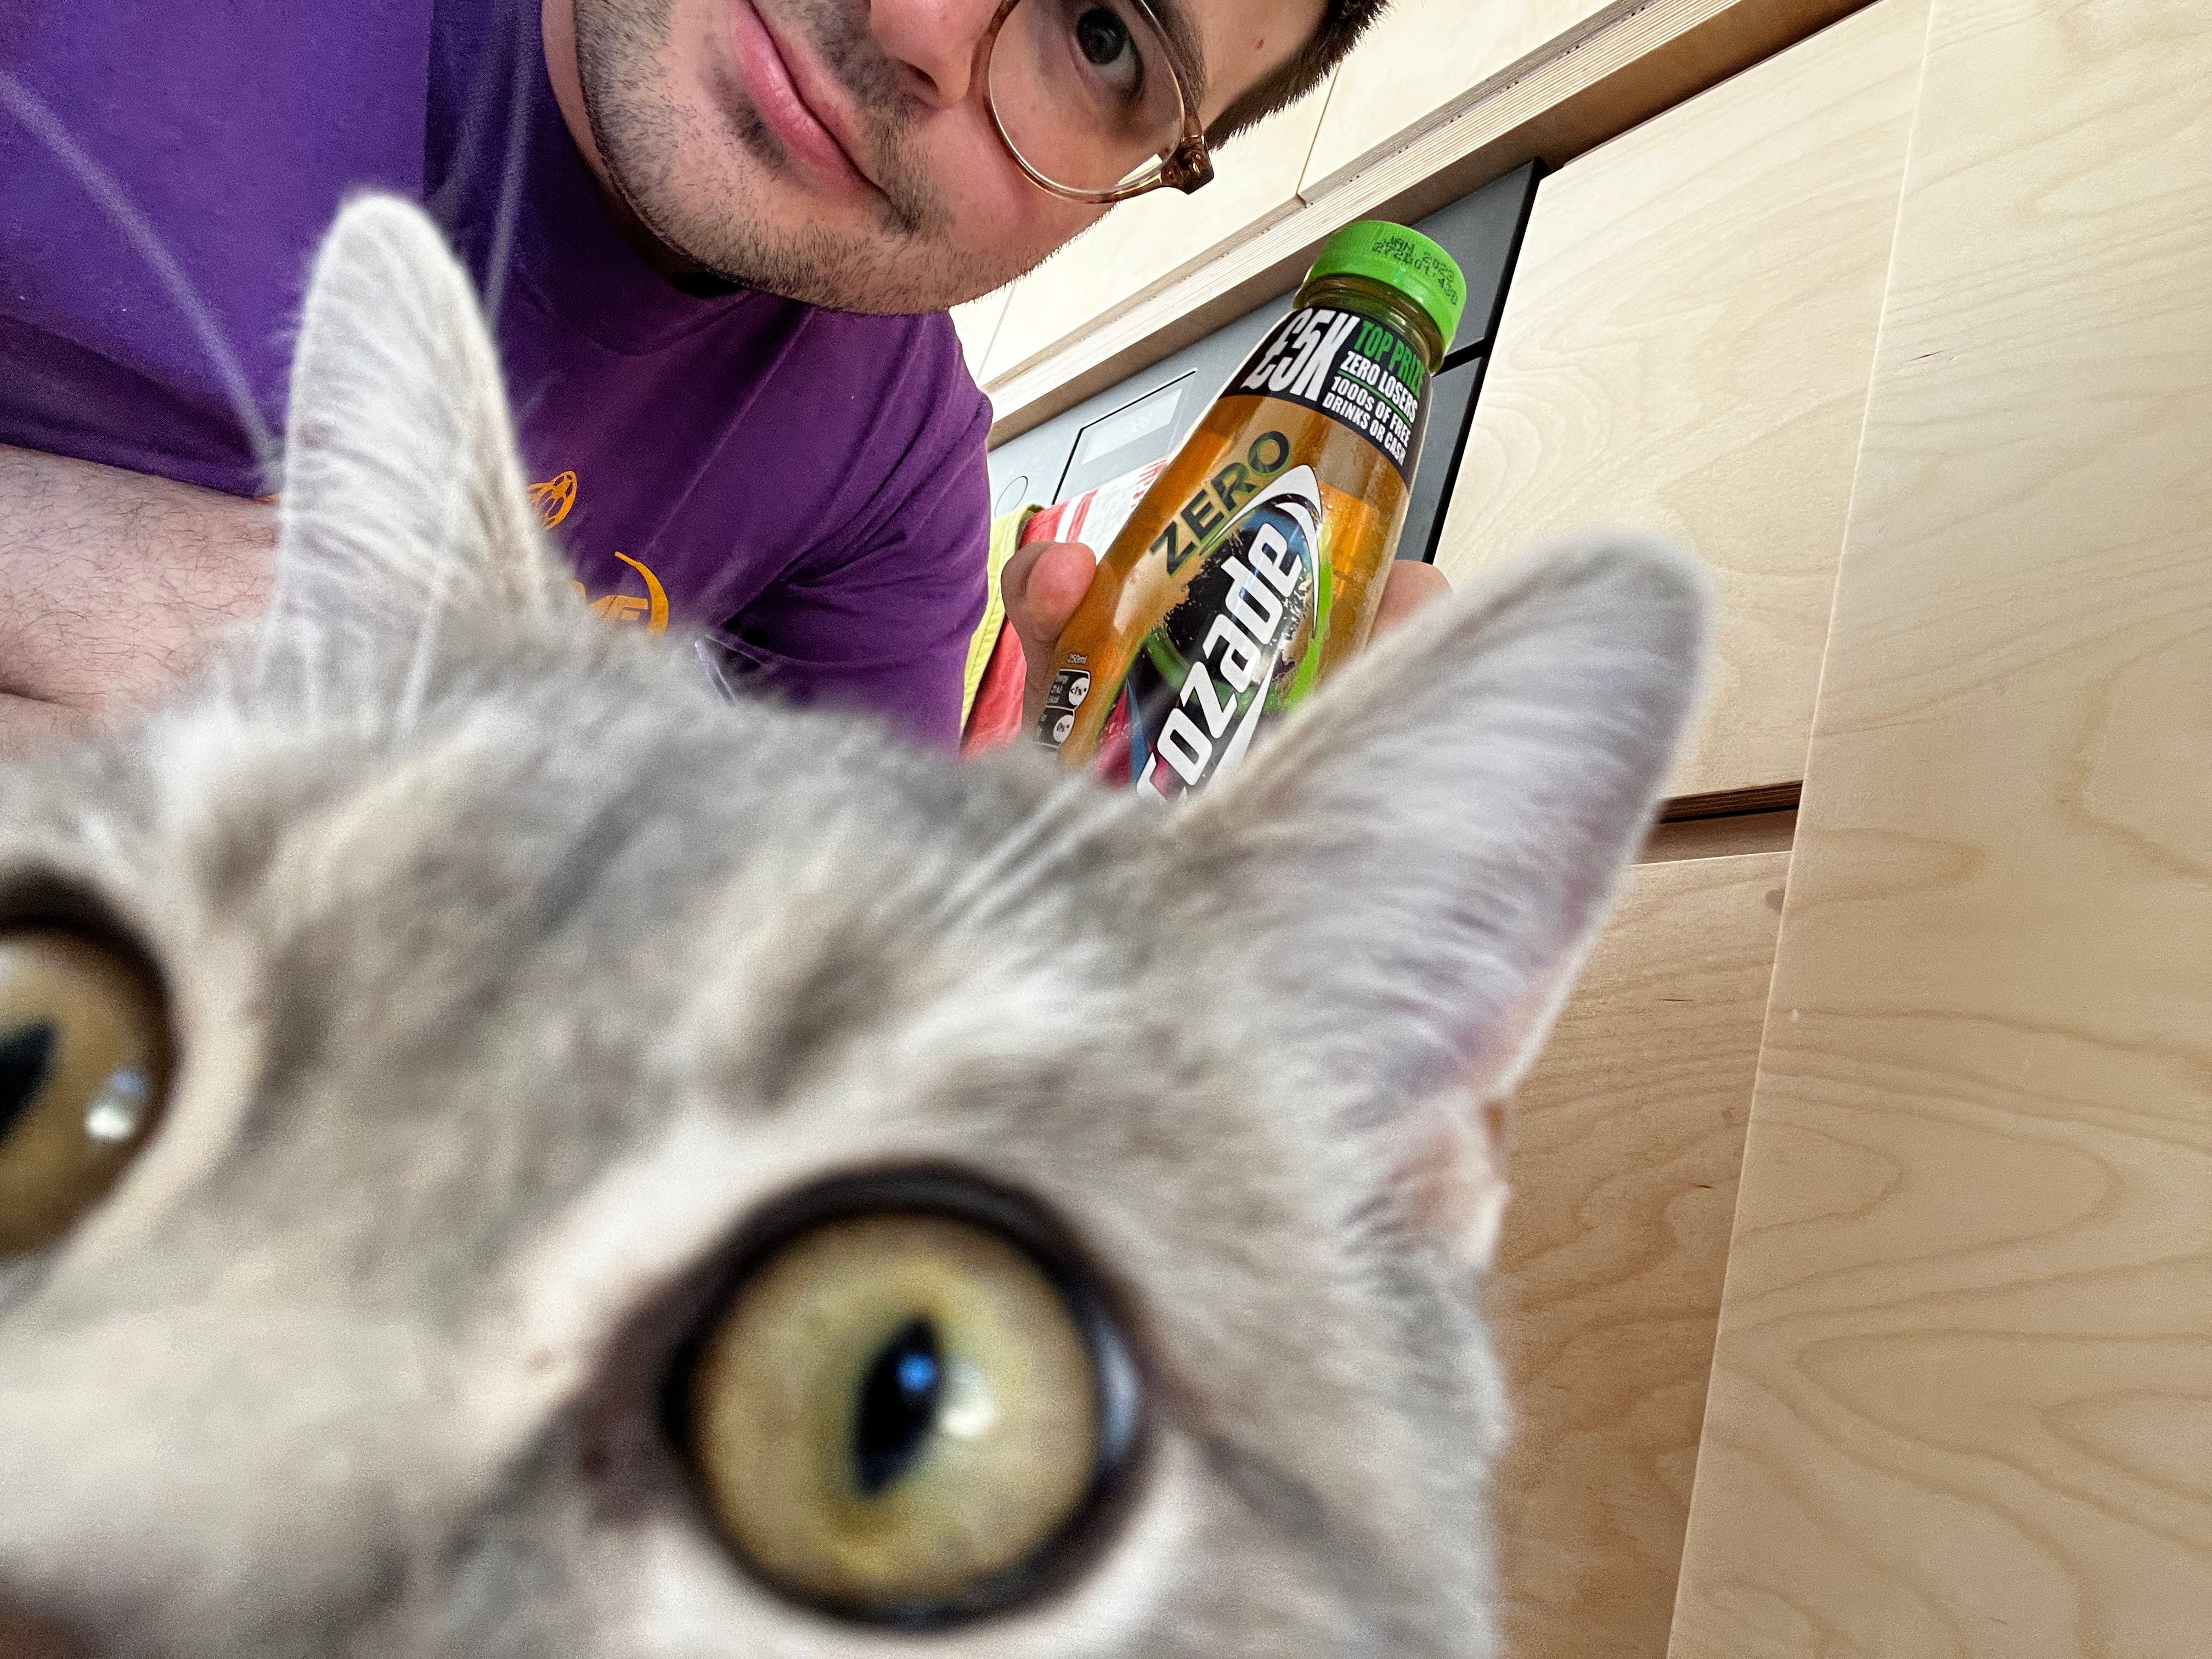 The author holds a Lucozade Zero while the bottom two thirds of the photo is taken up by a curious cat's face.